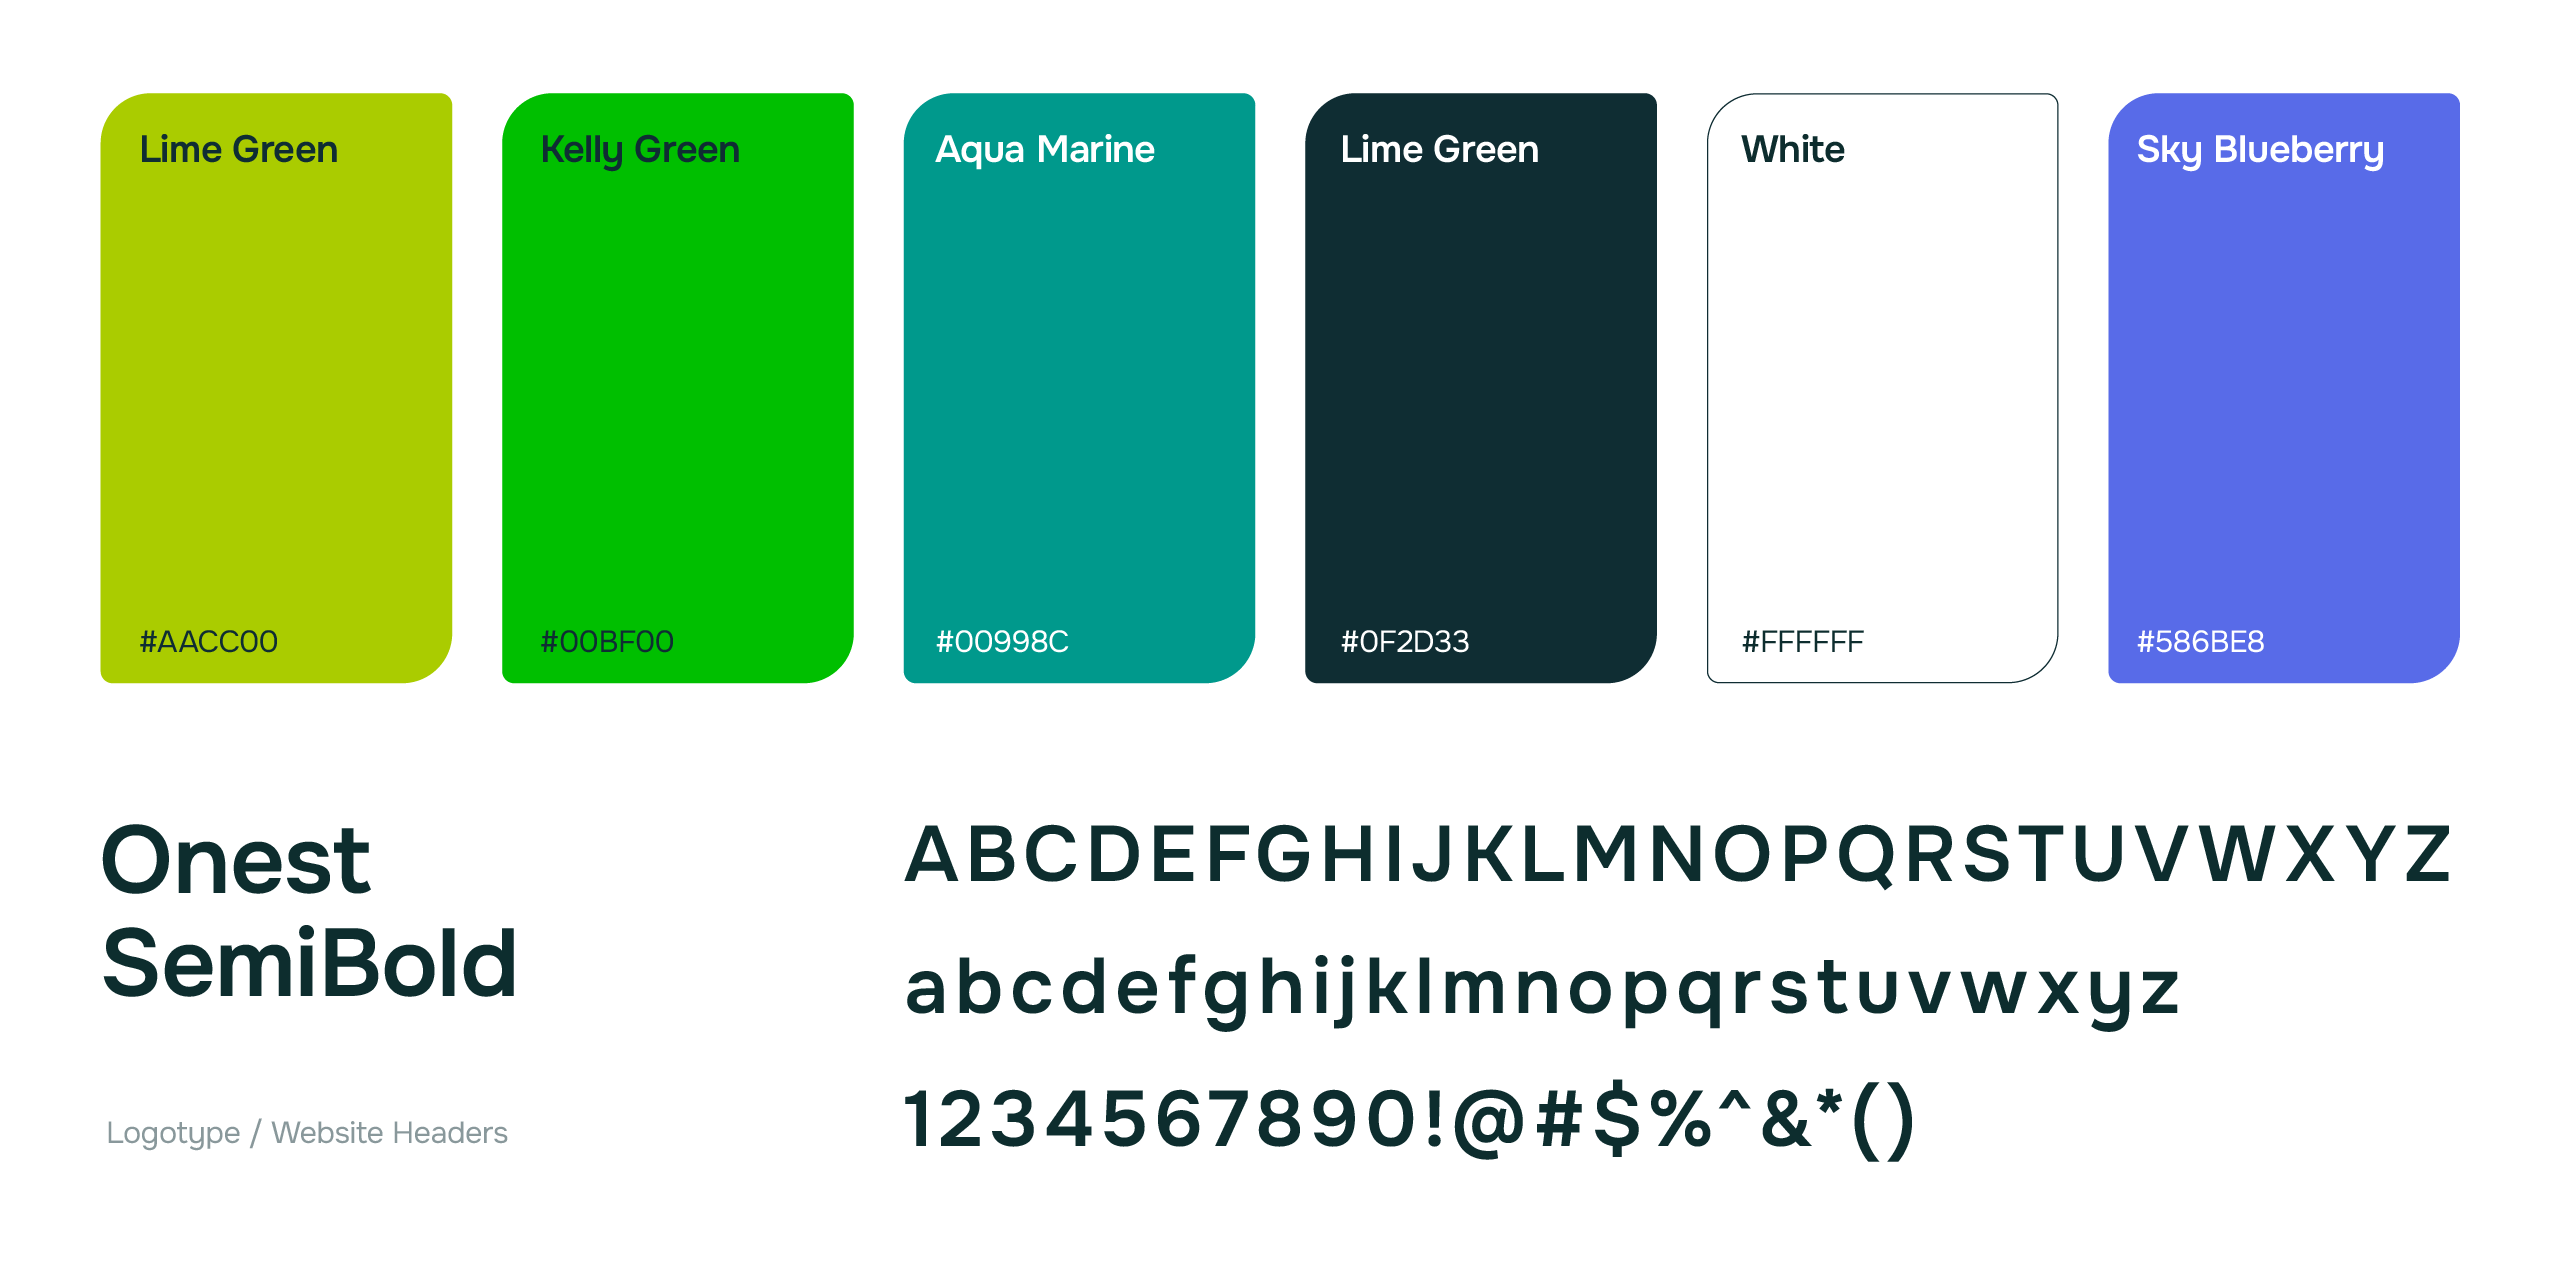 Foodstack’s style guide, featuring its official colors and fonts for consistent branding.